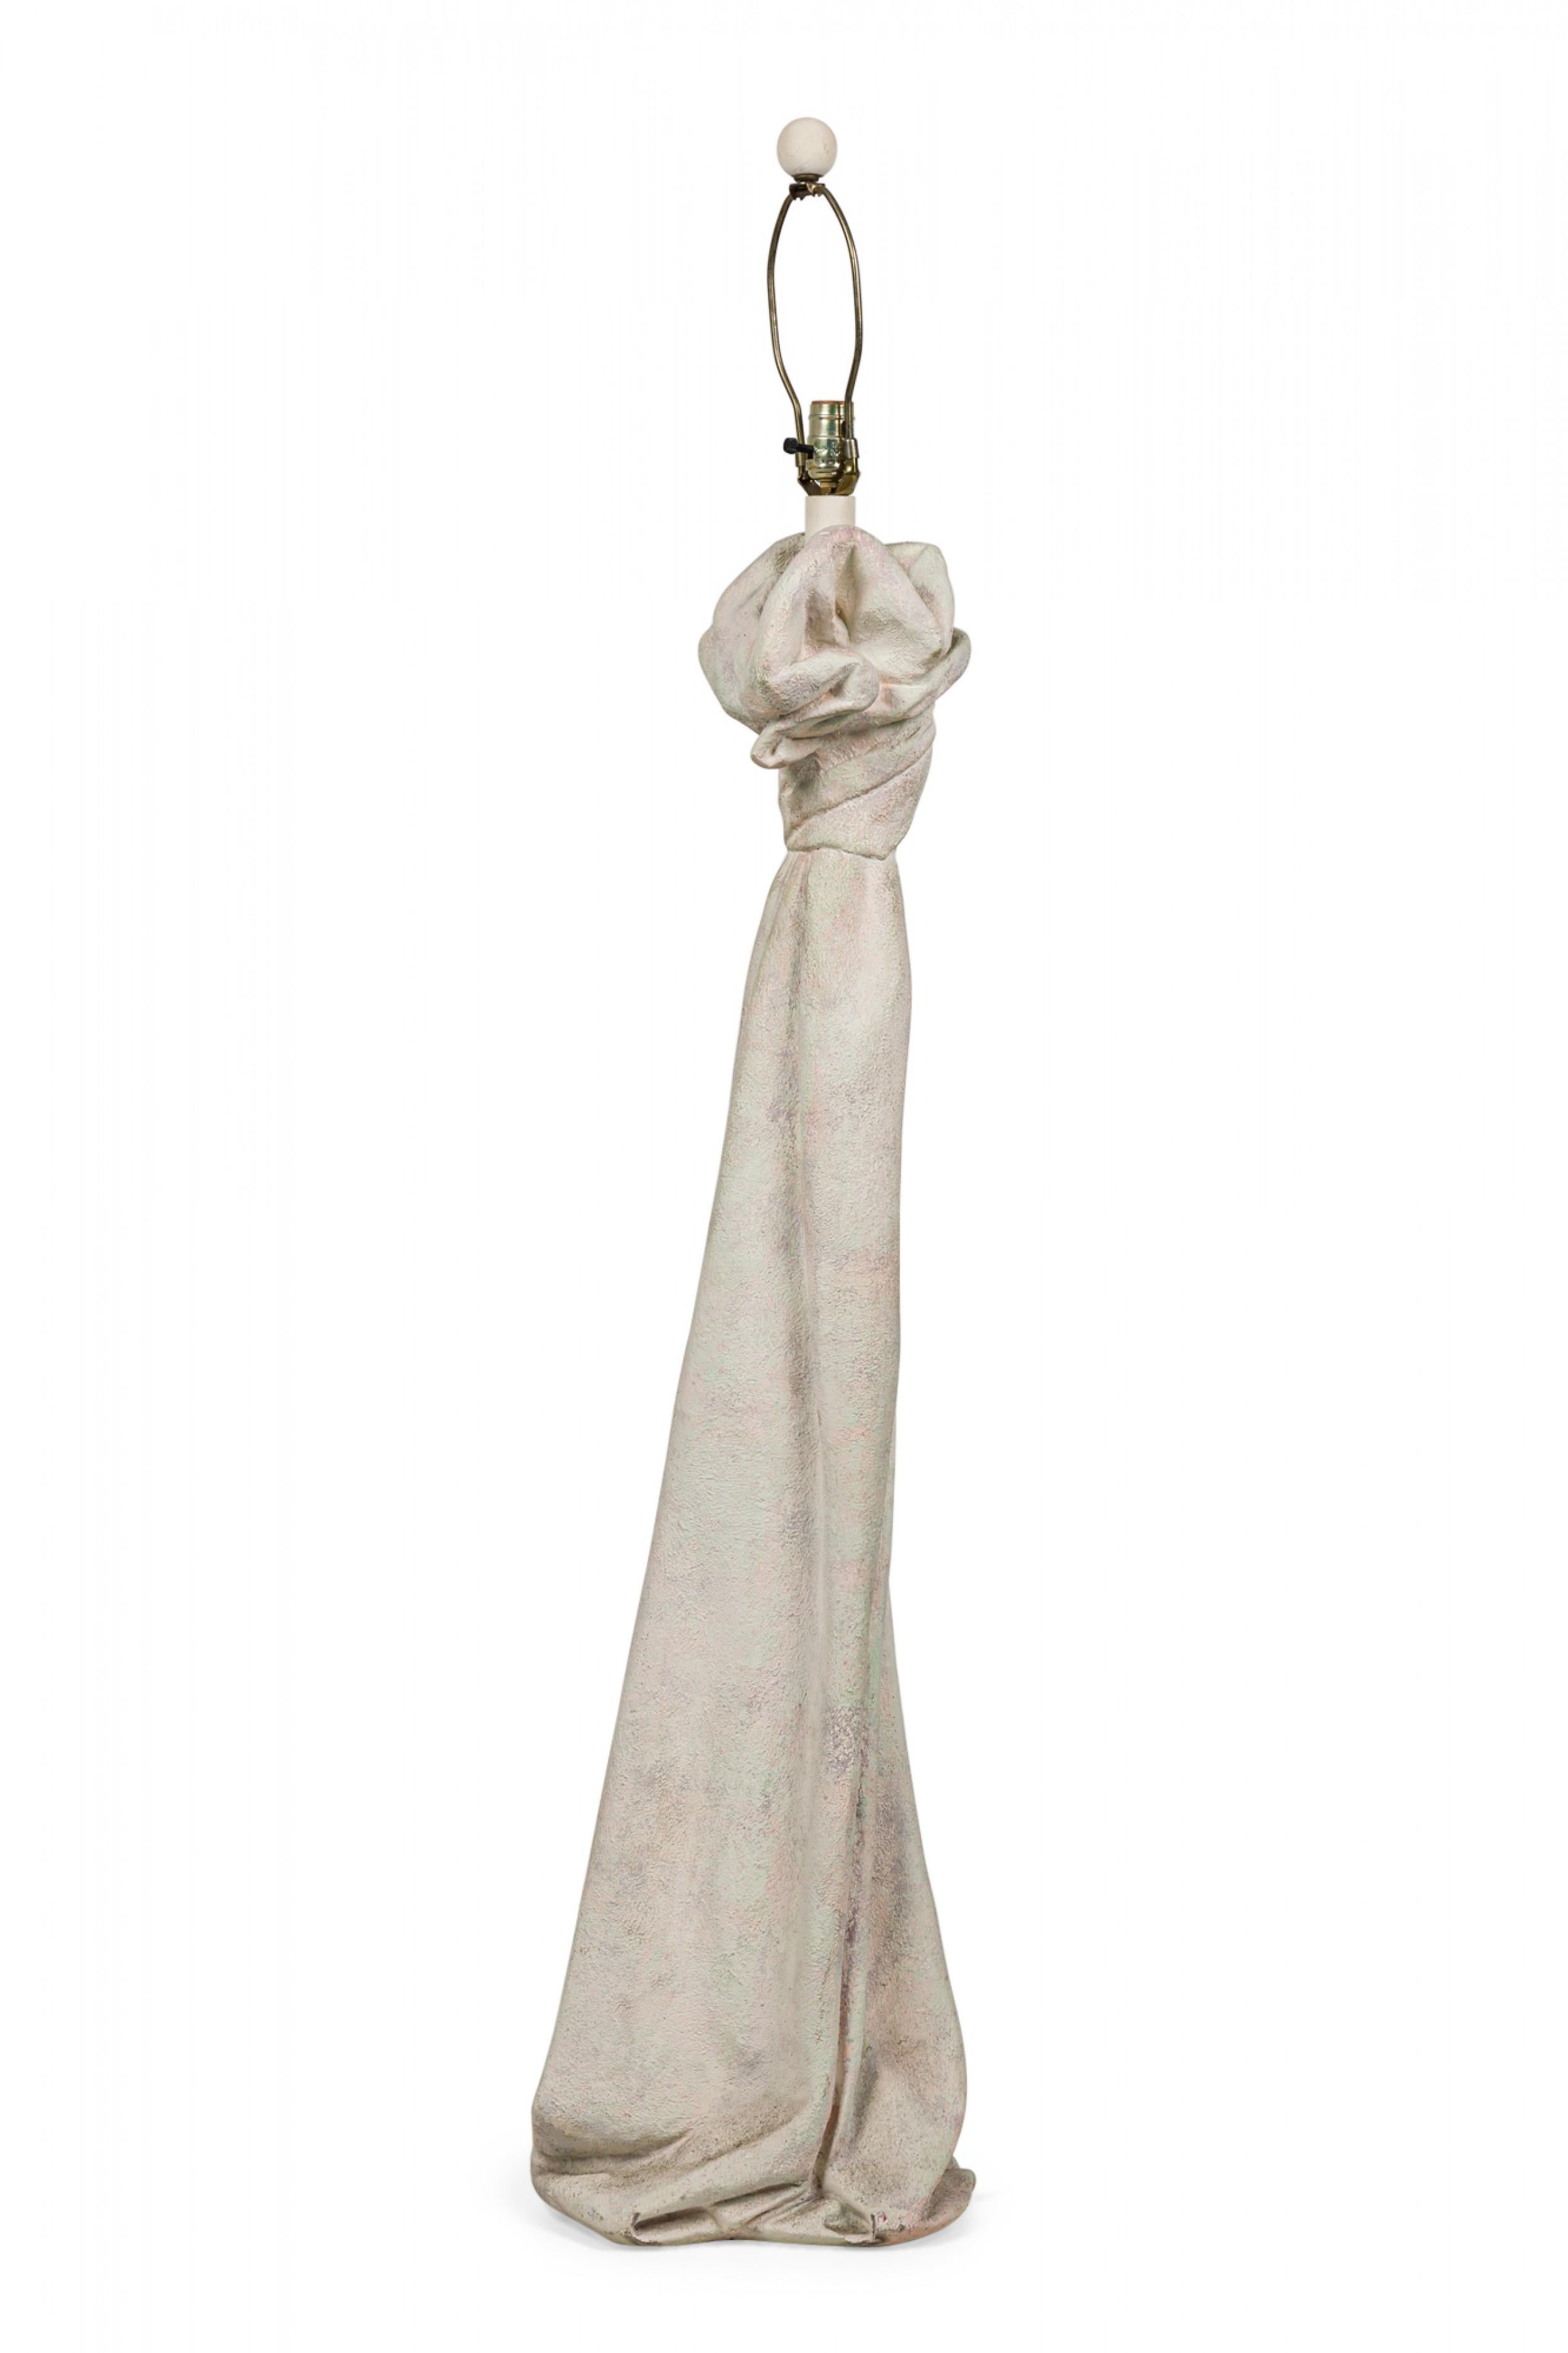 20th Century Midcentury American Plaster Knotted Drapery Floor Lamp For Sale